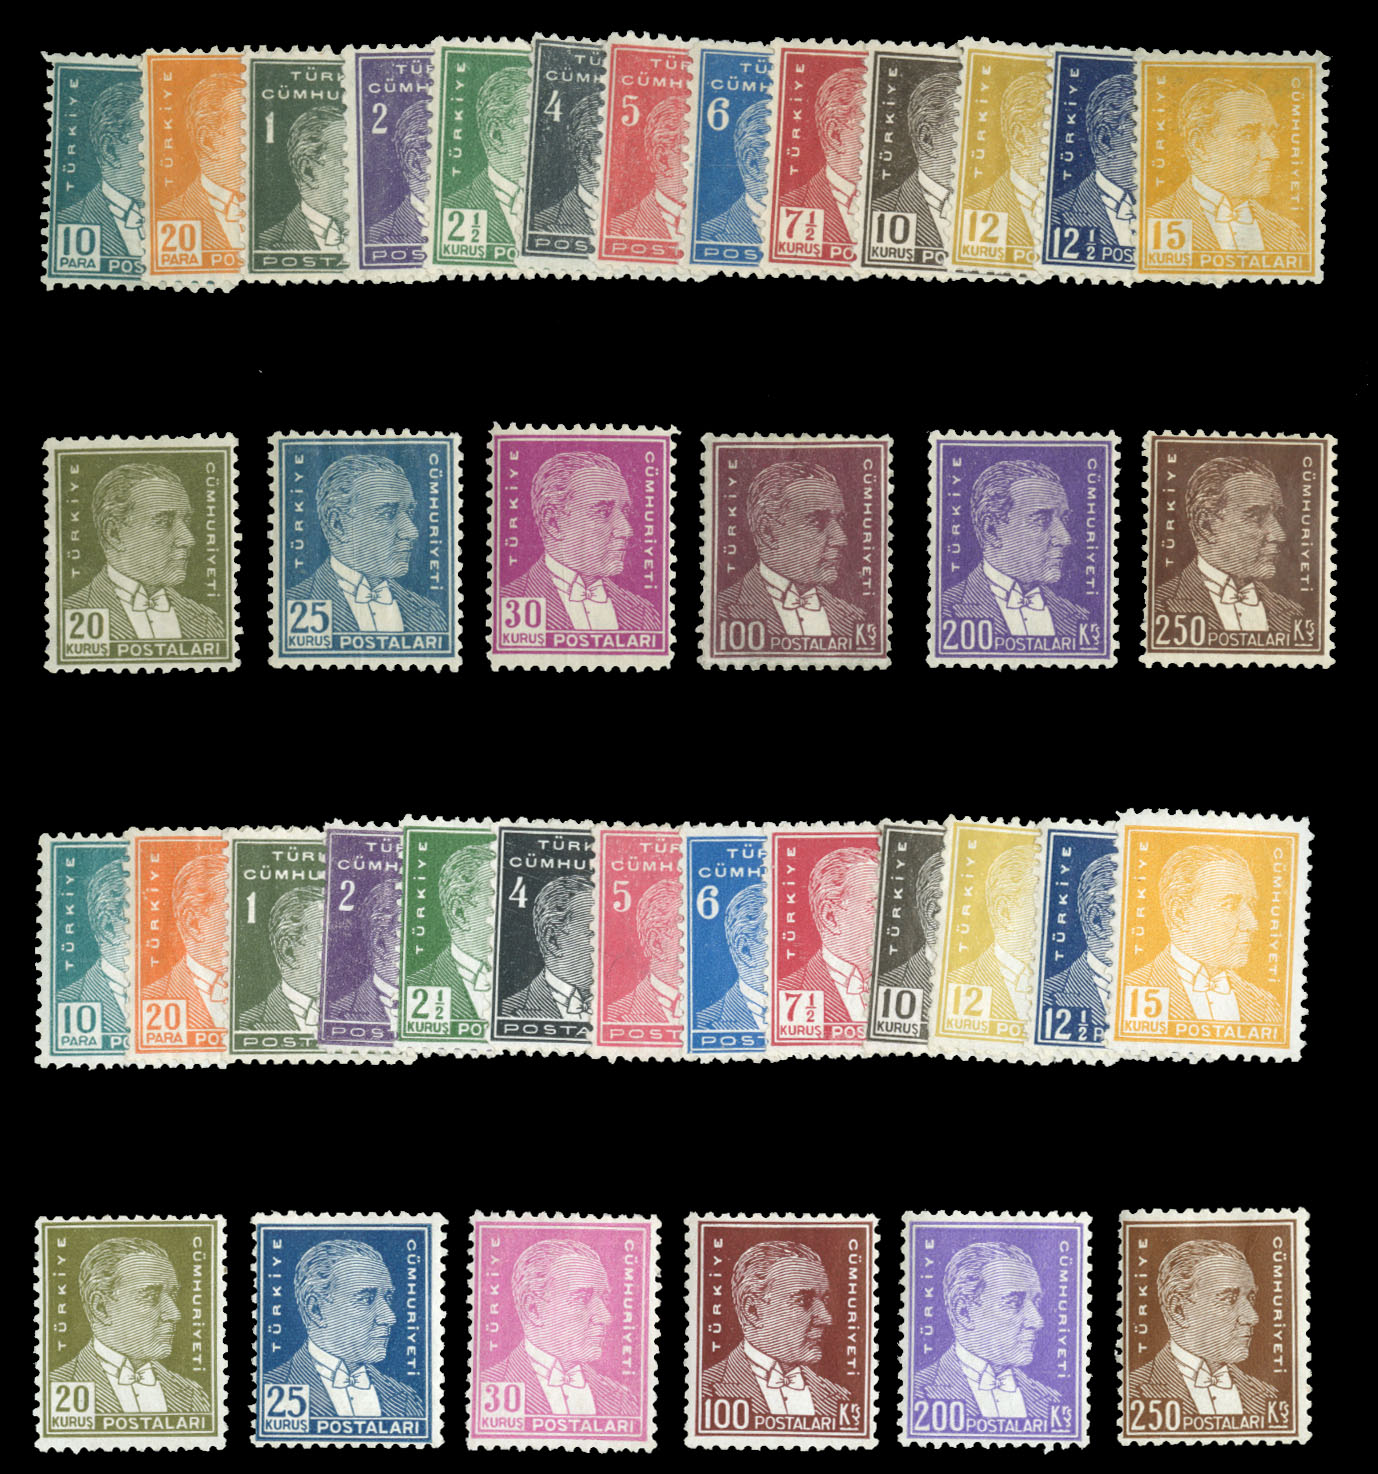 Lot 1353 - LARGE LOTS AND COLLECTIONS ARMENIA  -  Cherrystone Auctions U.S. & Worldwide Stamps & Postal History